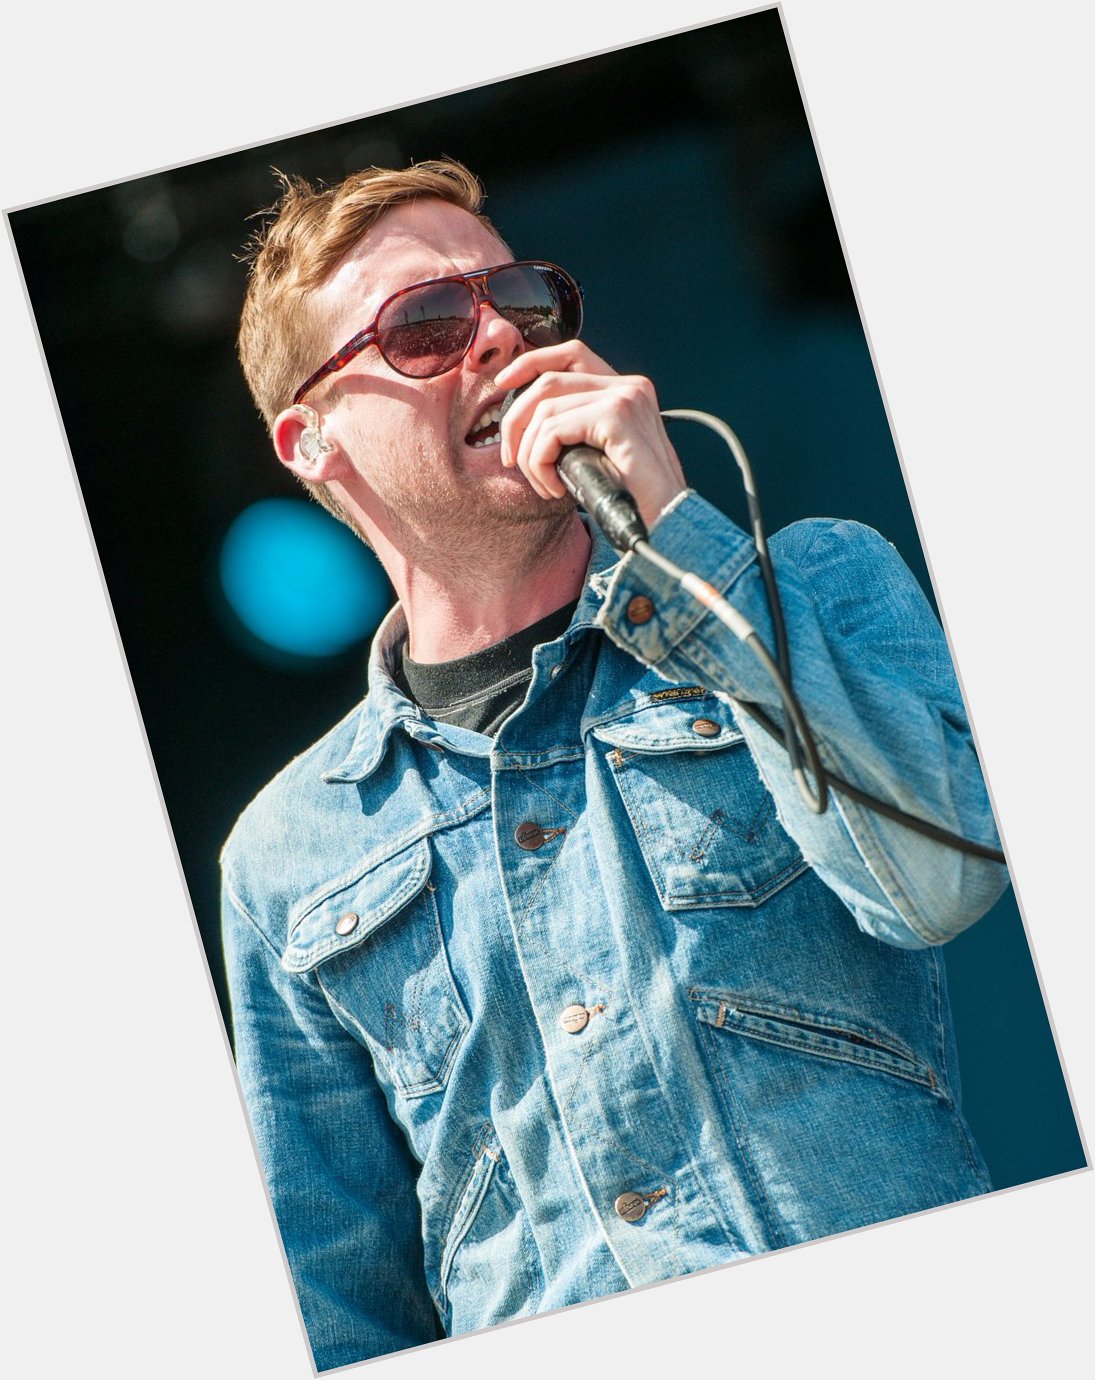 Please join me here at in wishing the one and only Ricky Wilson a very Happy 43rd Birthday today  